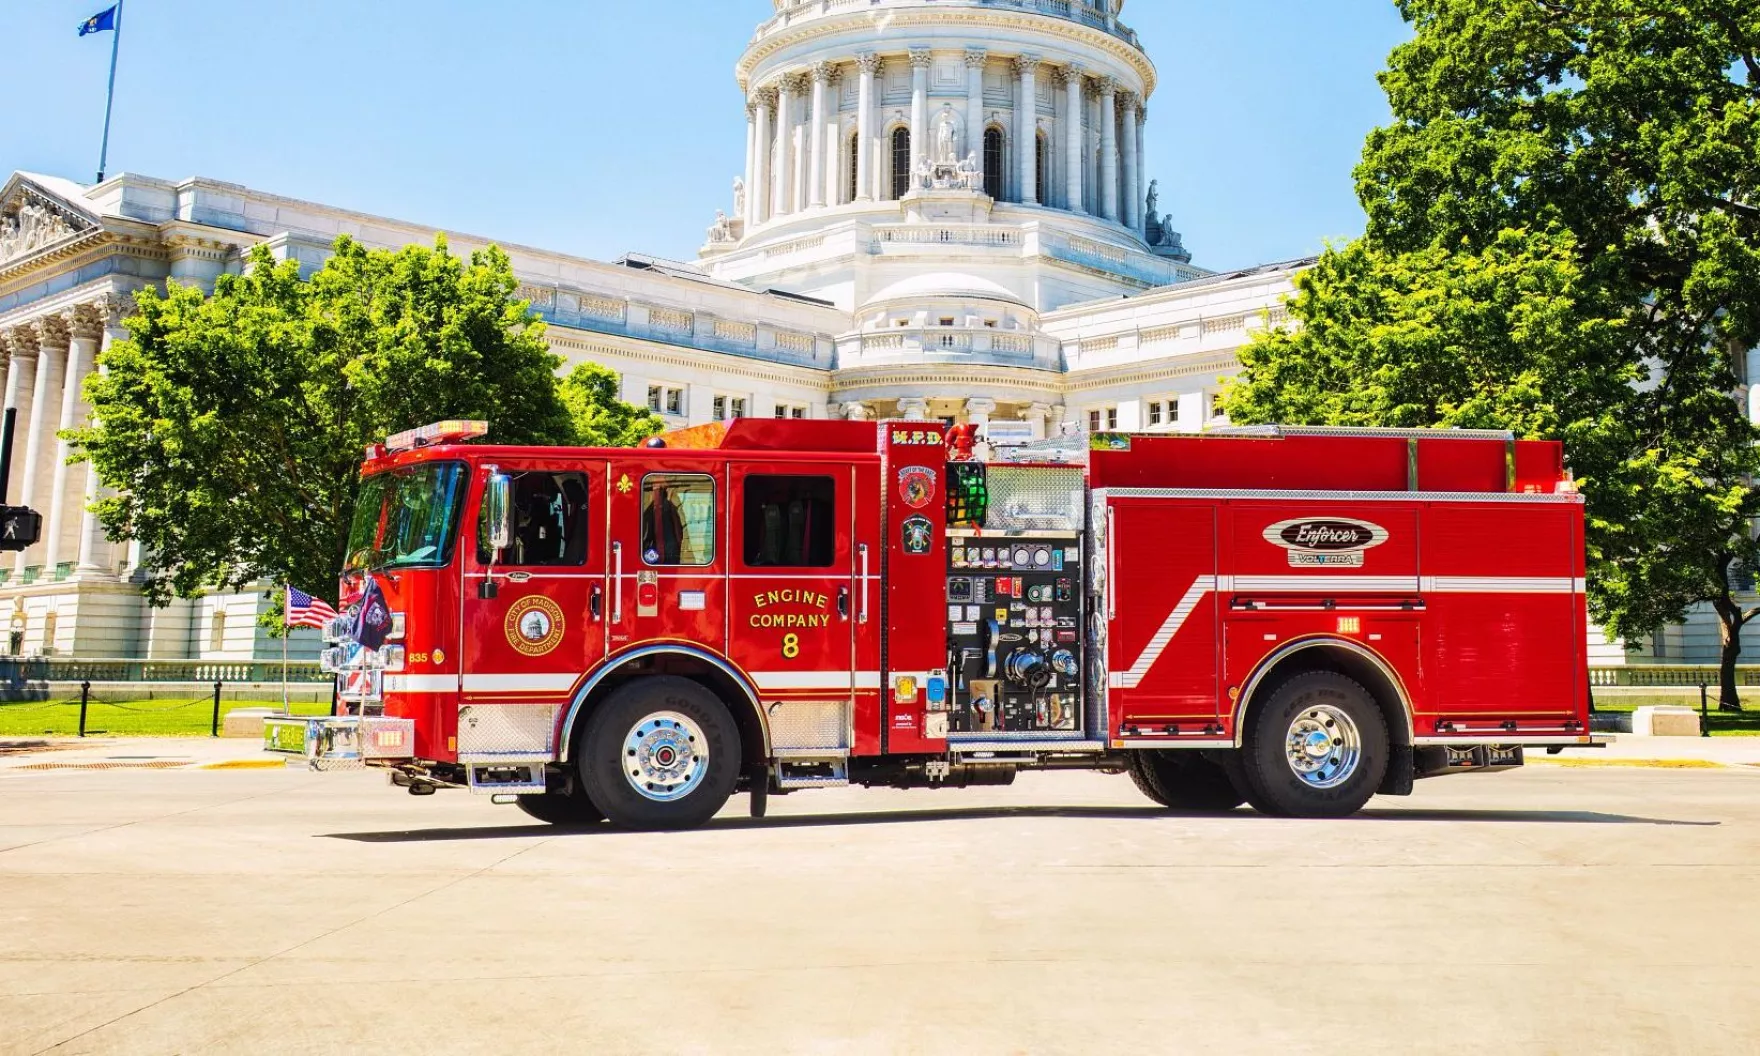 Portland Fire & Rescue would be the second department nationally to take delivery of an electric fire engine built by Pierce Manufacturing. This is the first one in service with the Madison Fire Department in Wisconsin